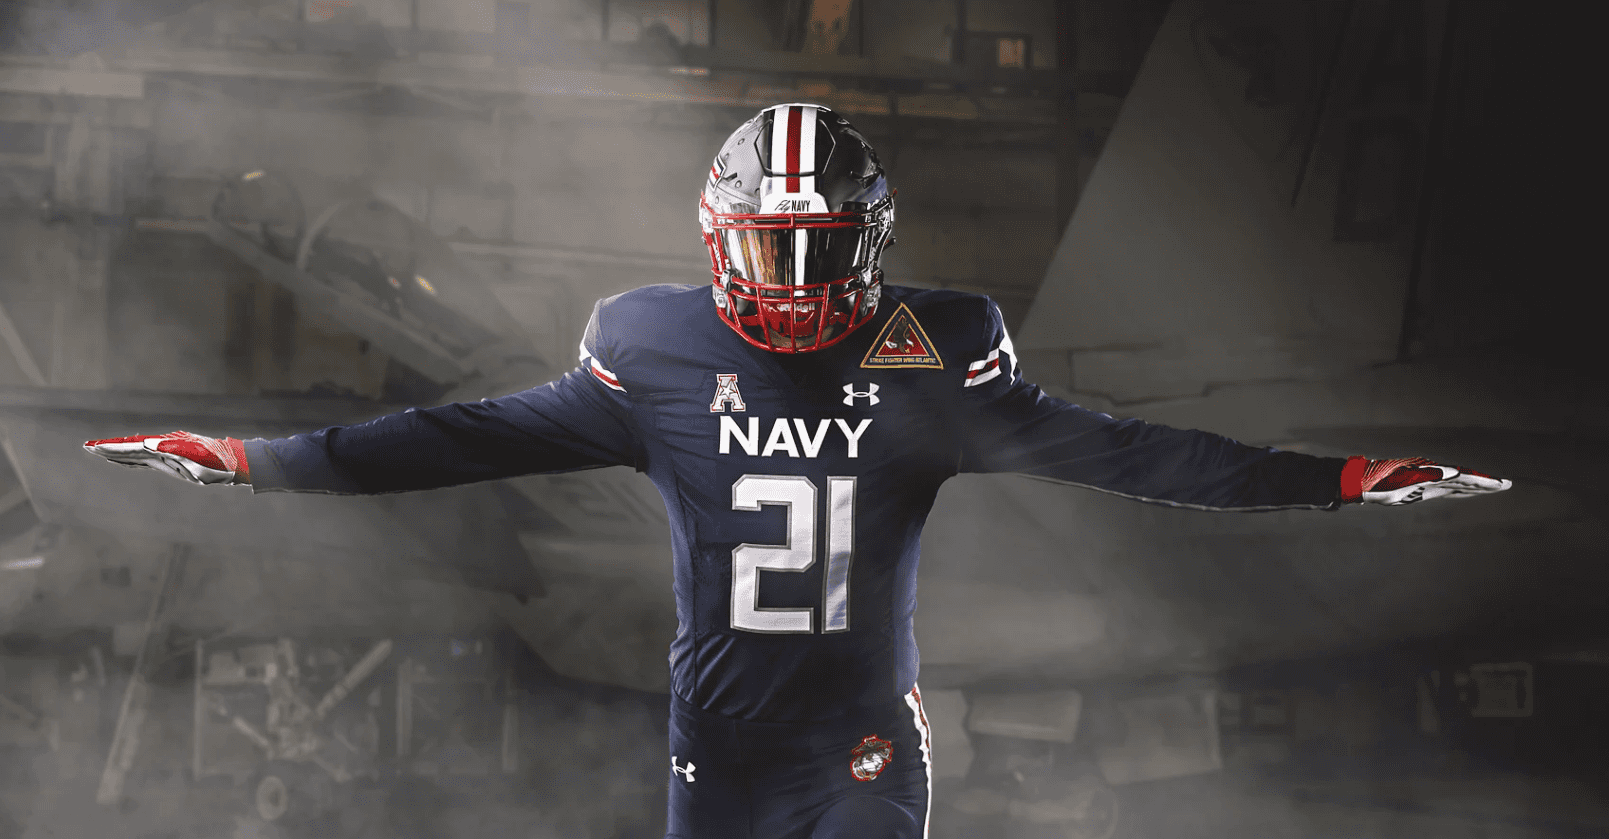 Here are 20 badass ArmyNavy game uniforms